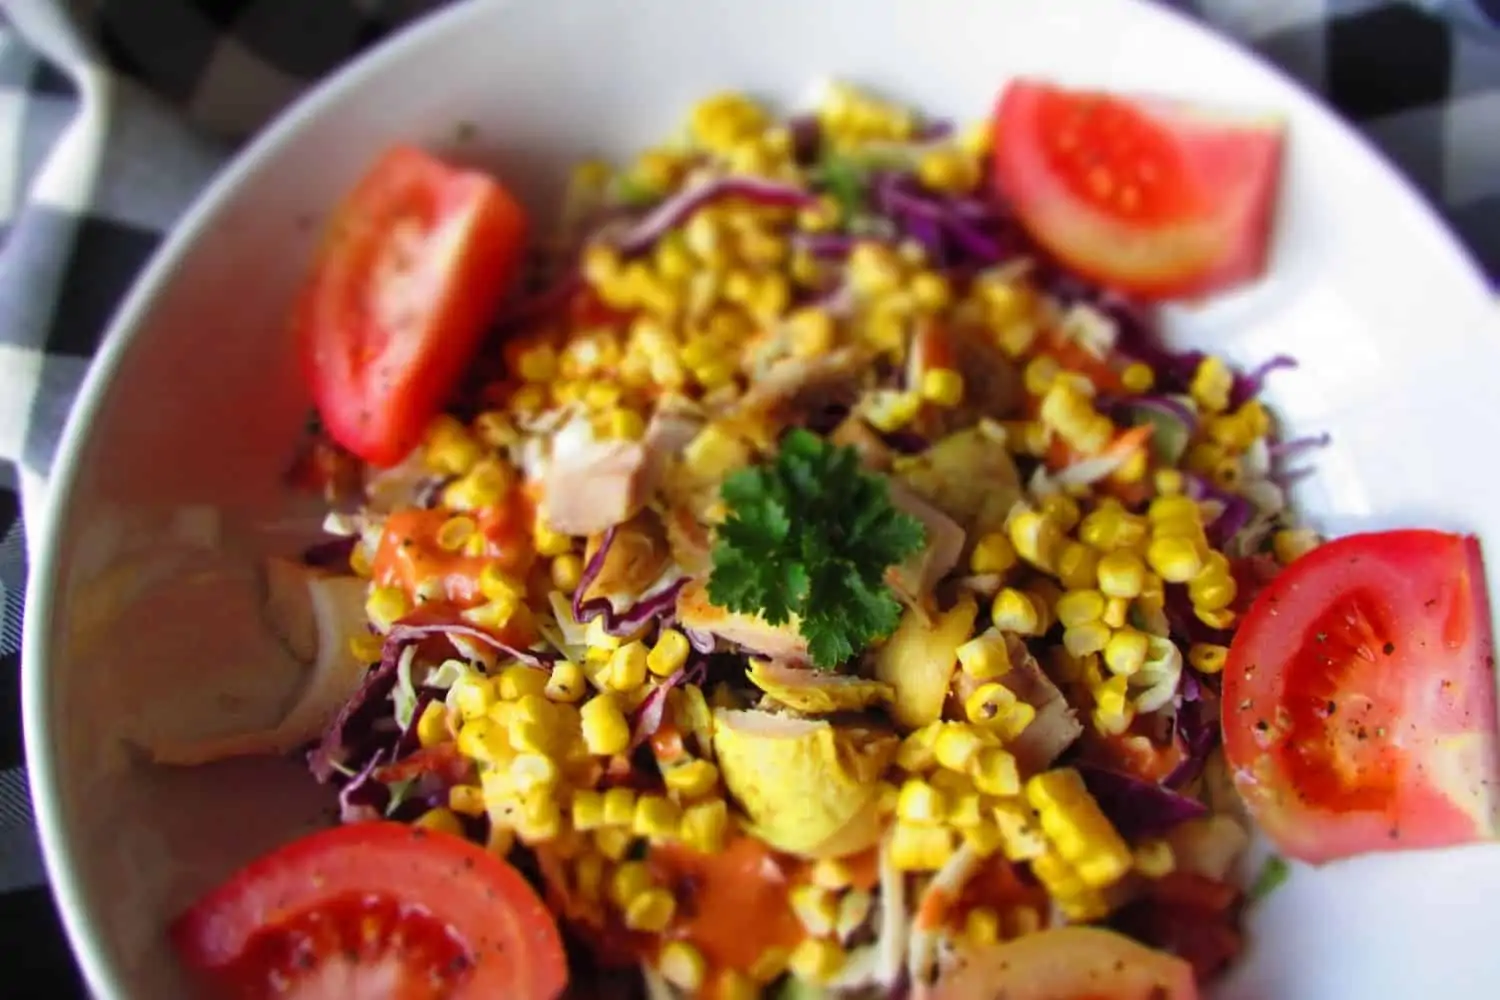 Coleslaw Salad with Grilled Sweetcorn, Chicken and Bacon